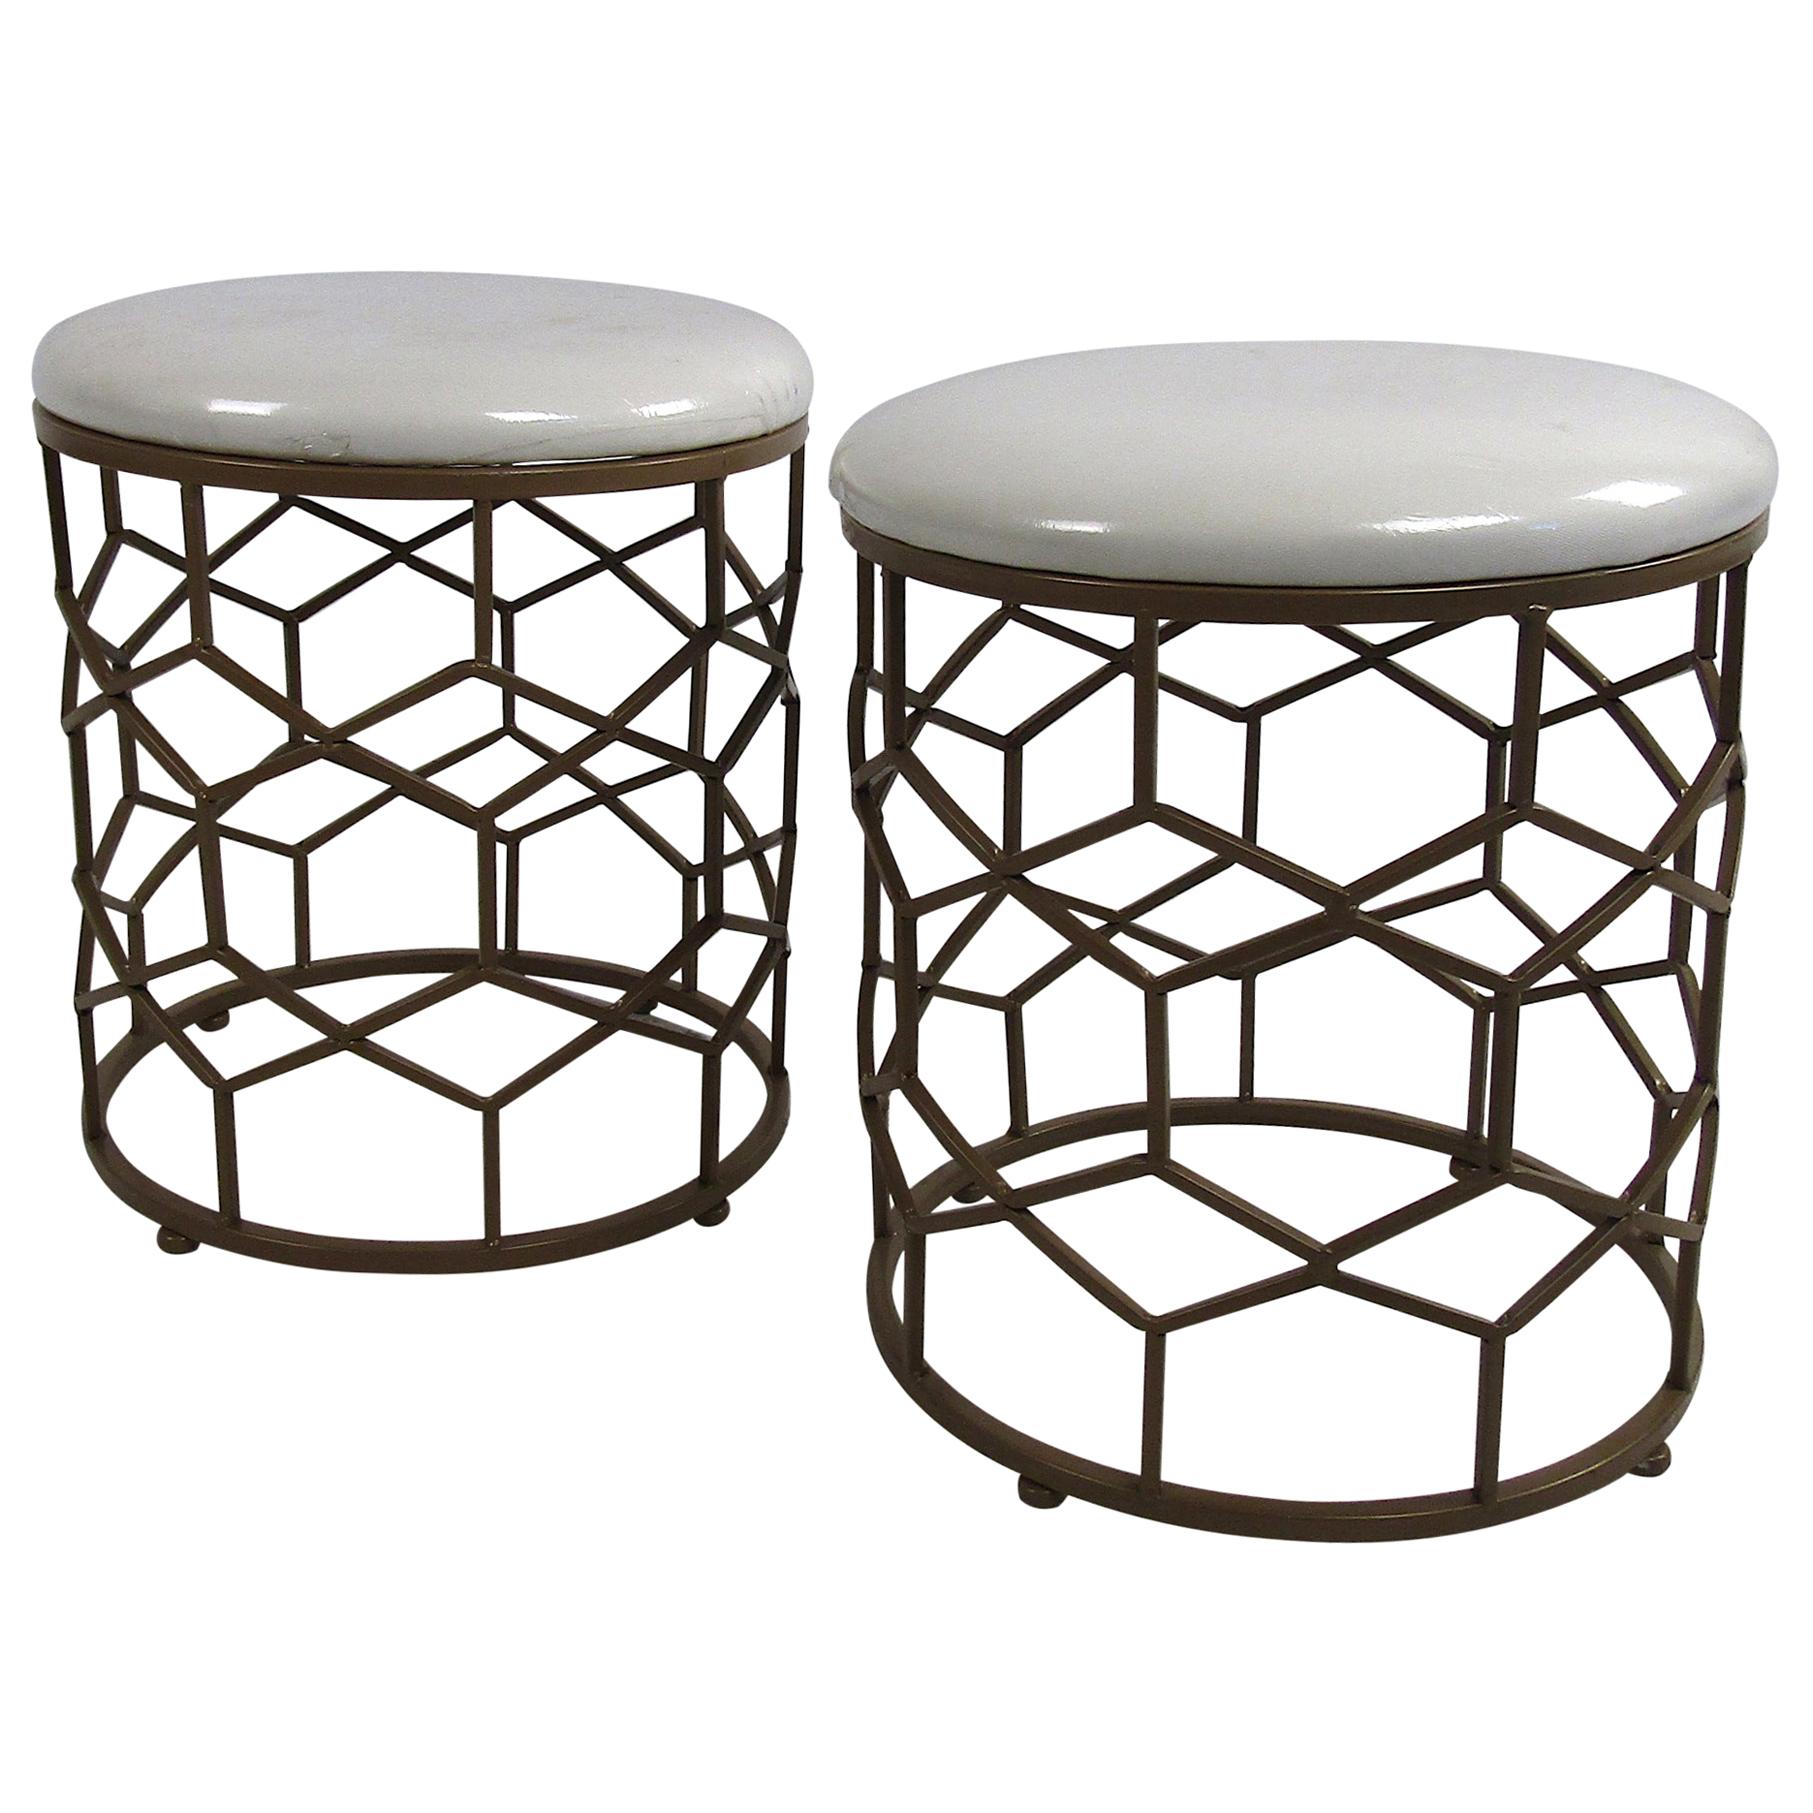 Pair of Mid-Century Modern Style Faux Brass Base White Vinyl Stools For Sale